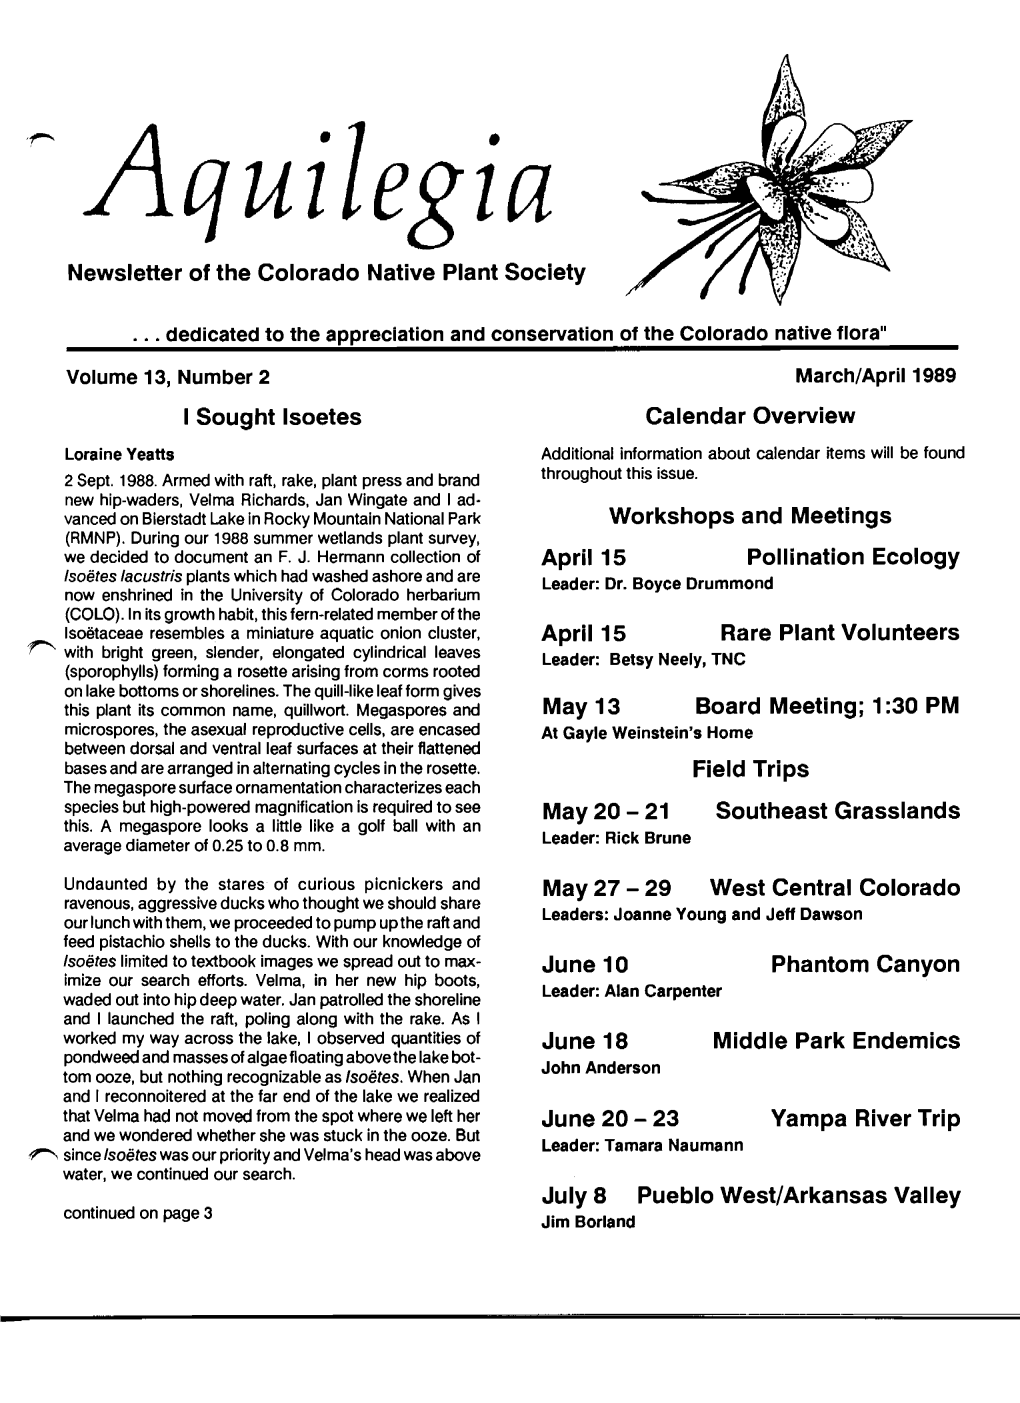 Newsletter of the Colorado Native Plant Society I Sought Isoetes